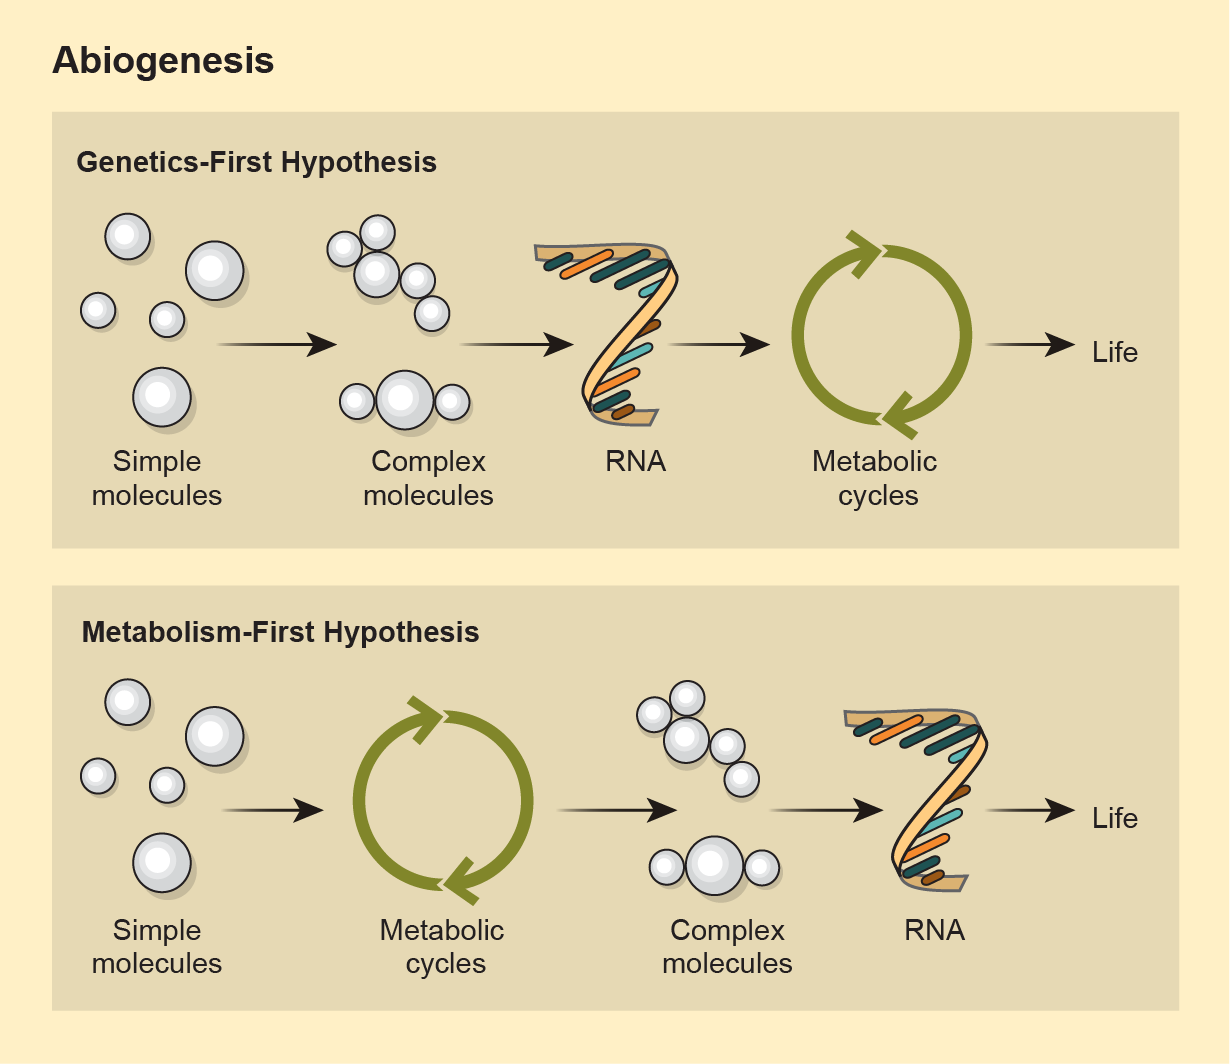 Graphic shows how the steps to get from simple molecules to life are ordered differently in the “genetics first” and “metabolism first” hypotheses of abiogenesis.